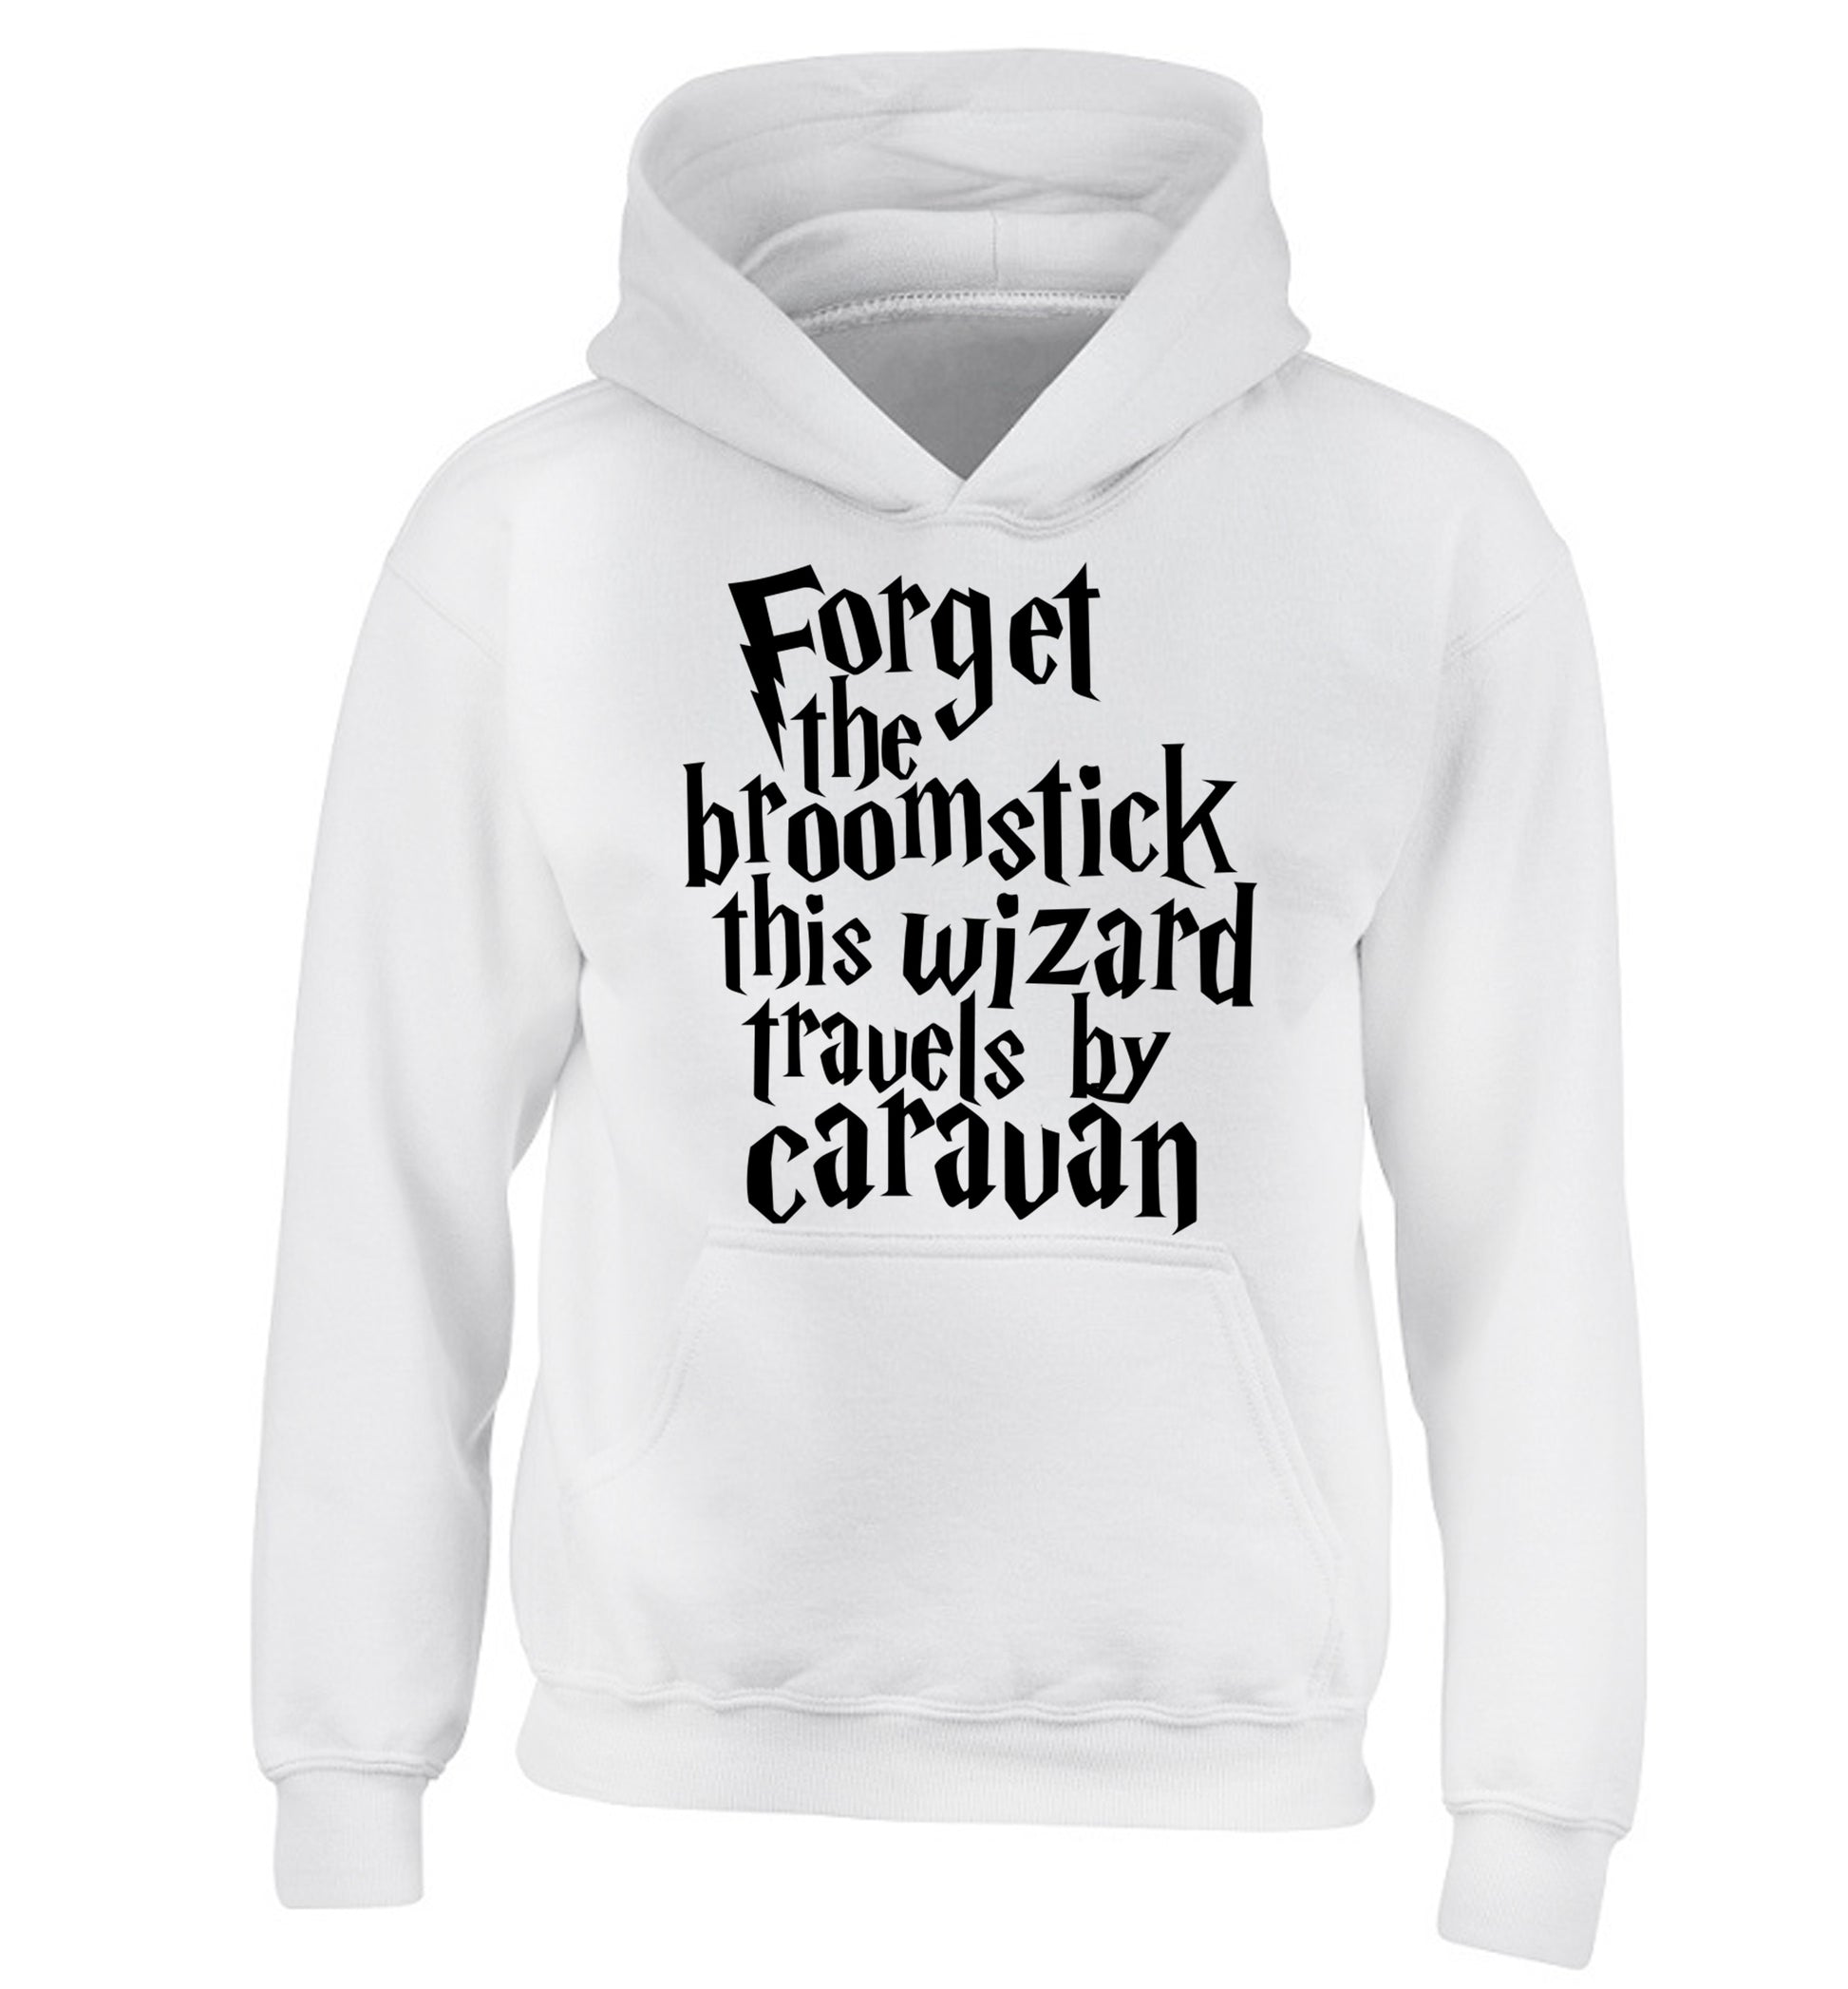 Forget the broomstick this wizard travels by caravan children's white hoodie 12-14 Years